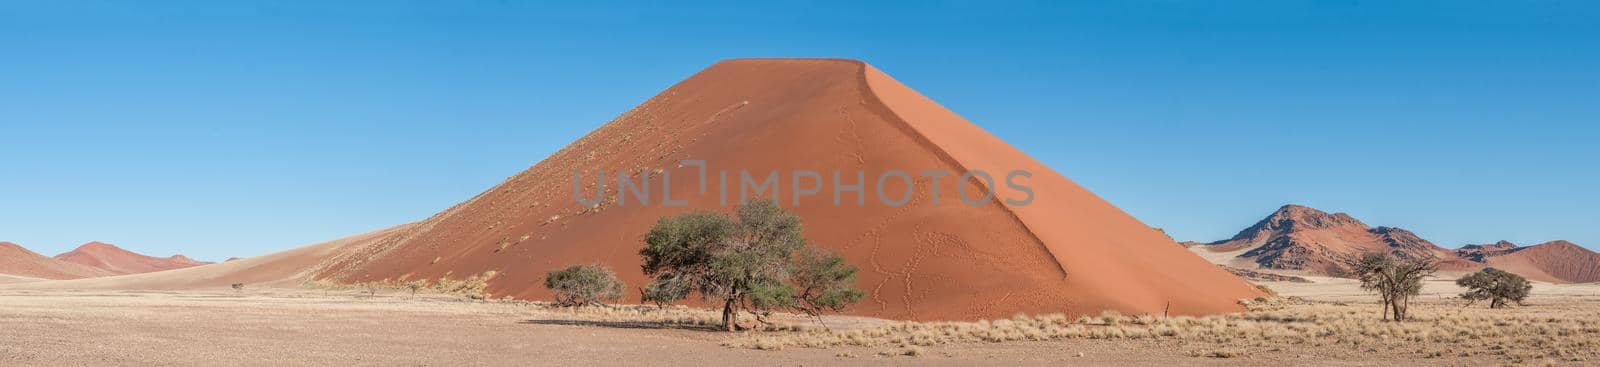 Panoramic dune landscape between Sesriem and Sossusvlei by dpreezg